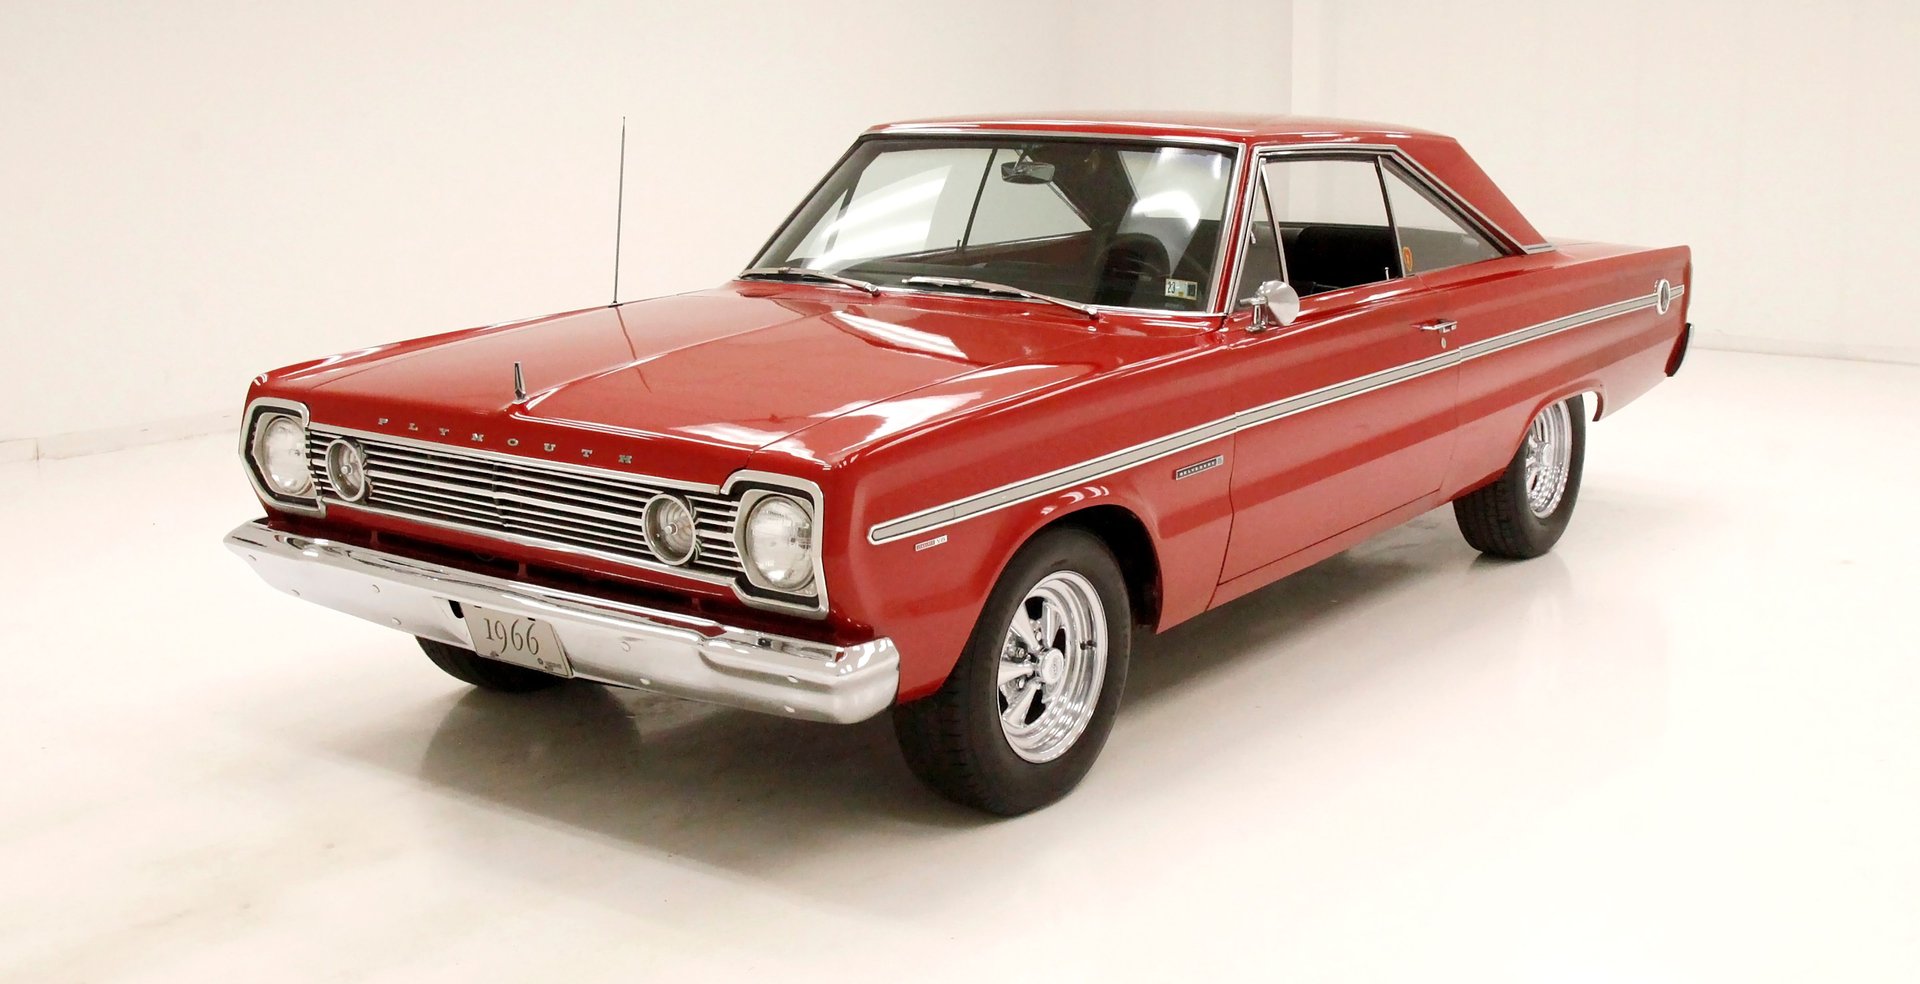 1966 Plymouth Belvedere II Photograph by Flees Photos - Pixels